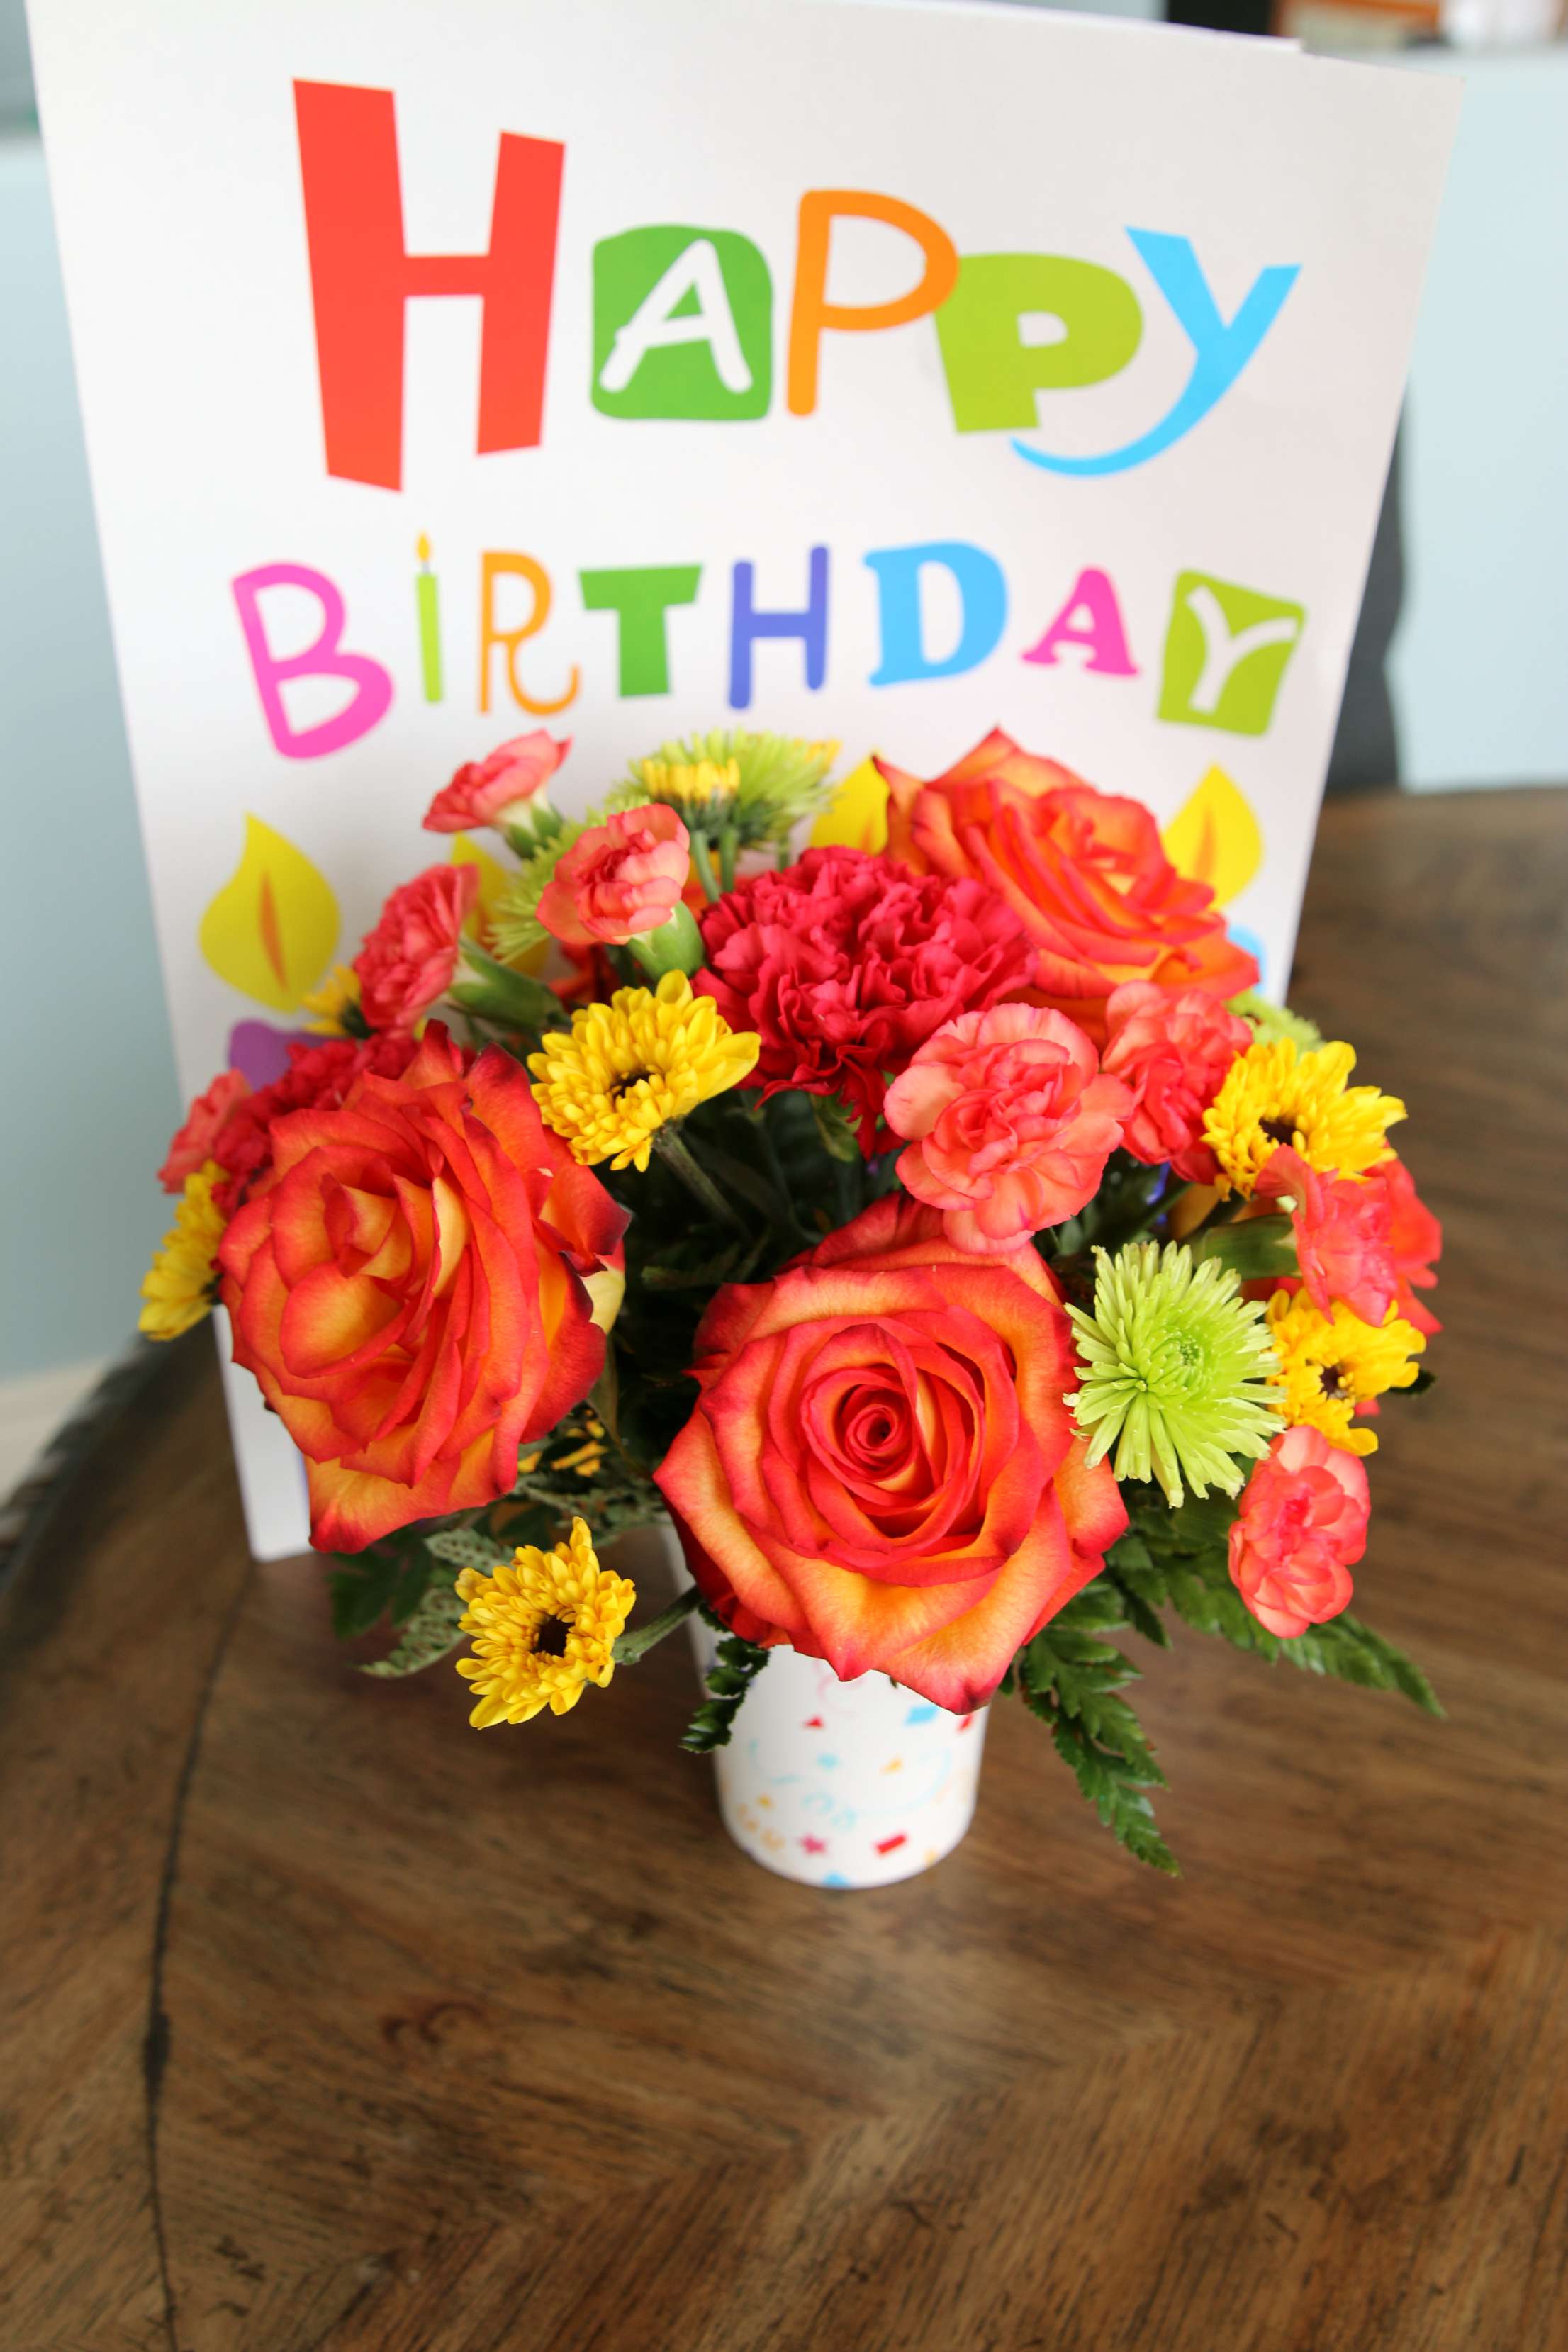 How My Birthday Was Brightened With A Teleflora Bouquet – It's a ...